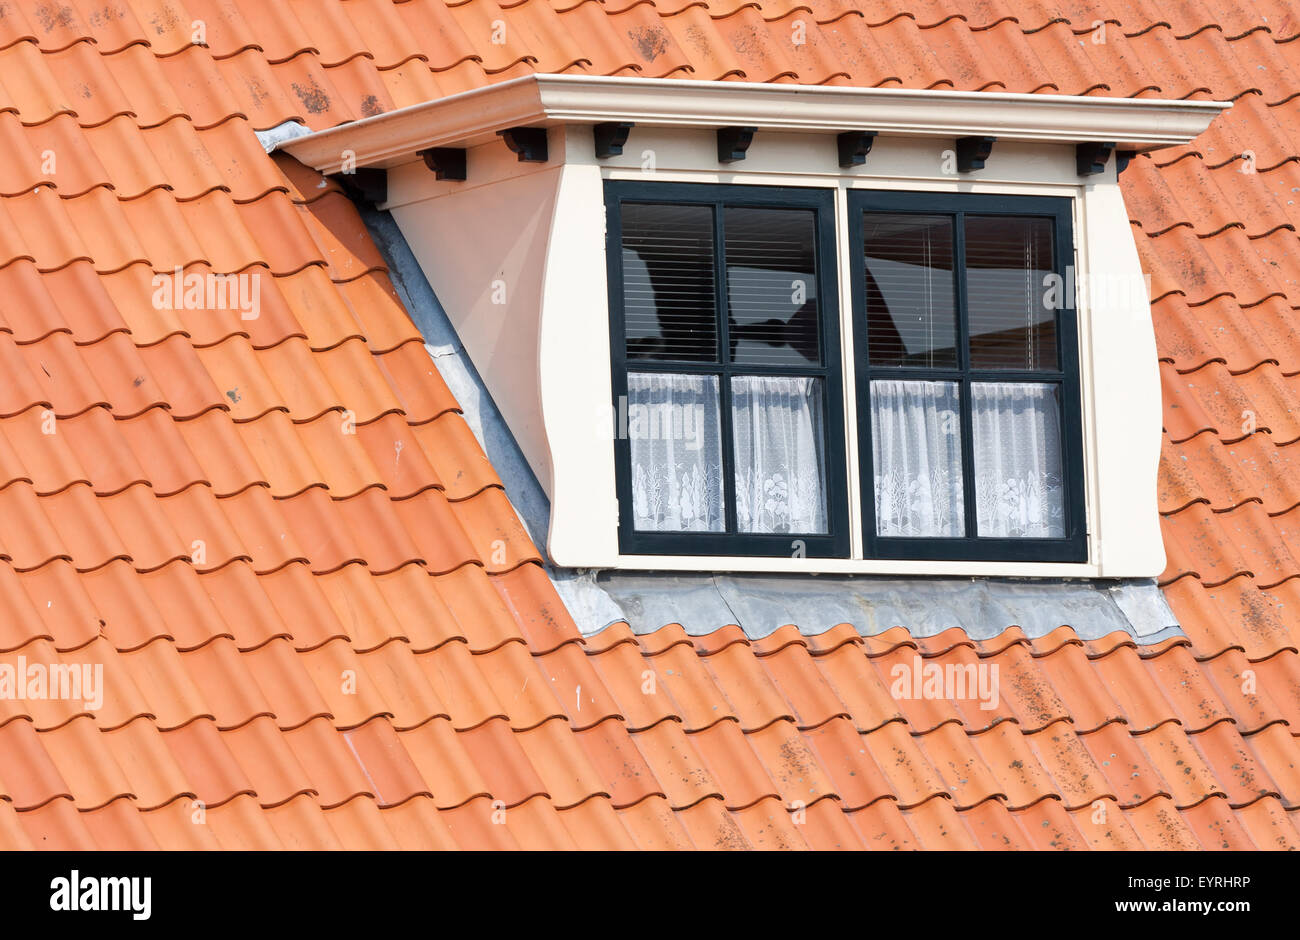 Typical Dutch roof with dormer and squared windows Stock Photo